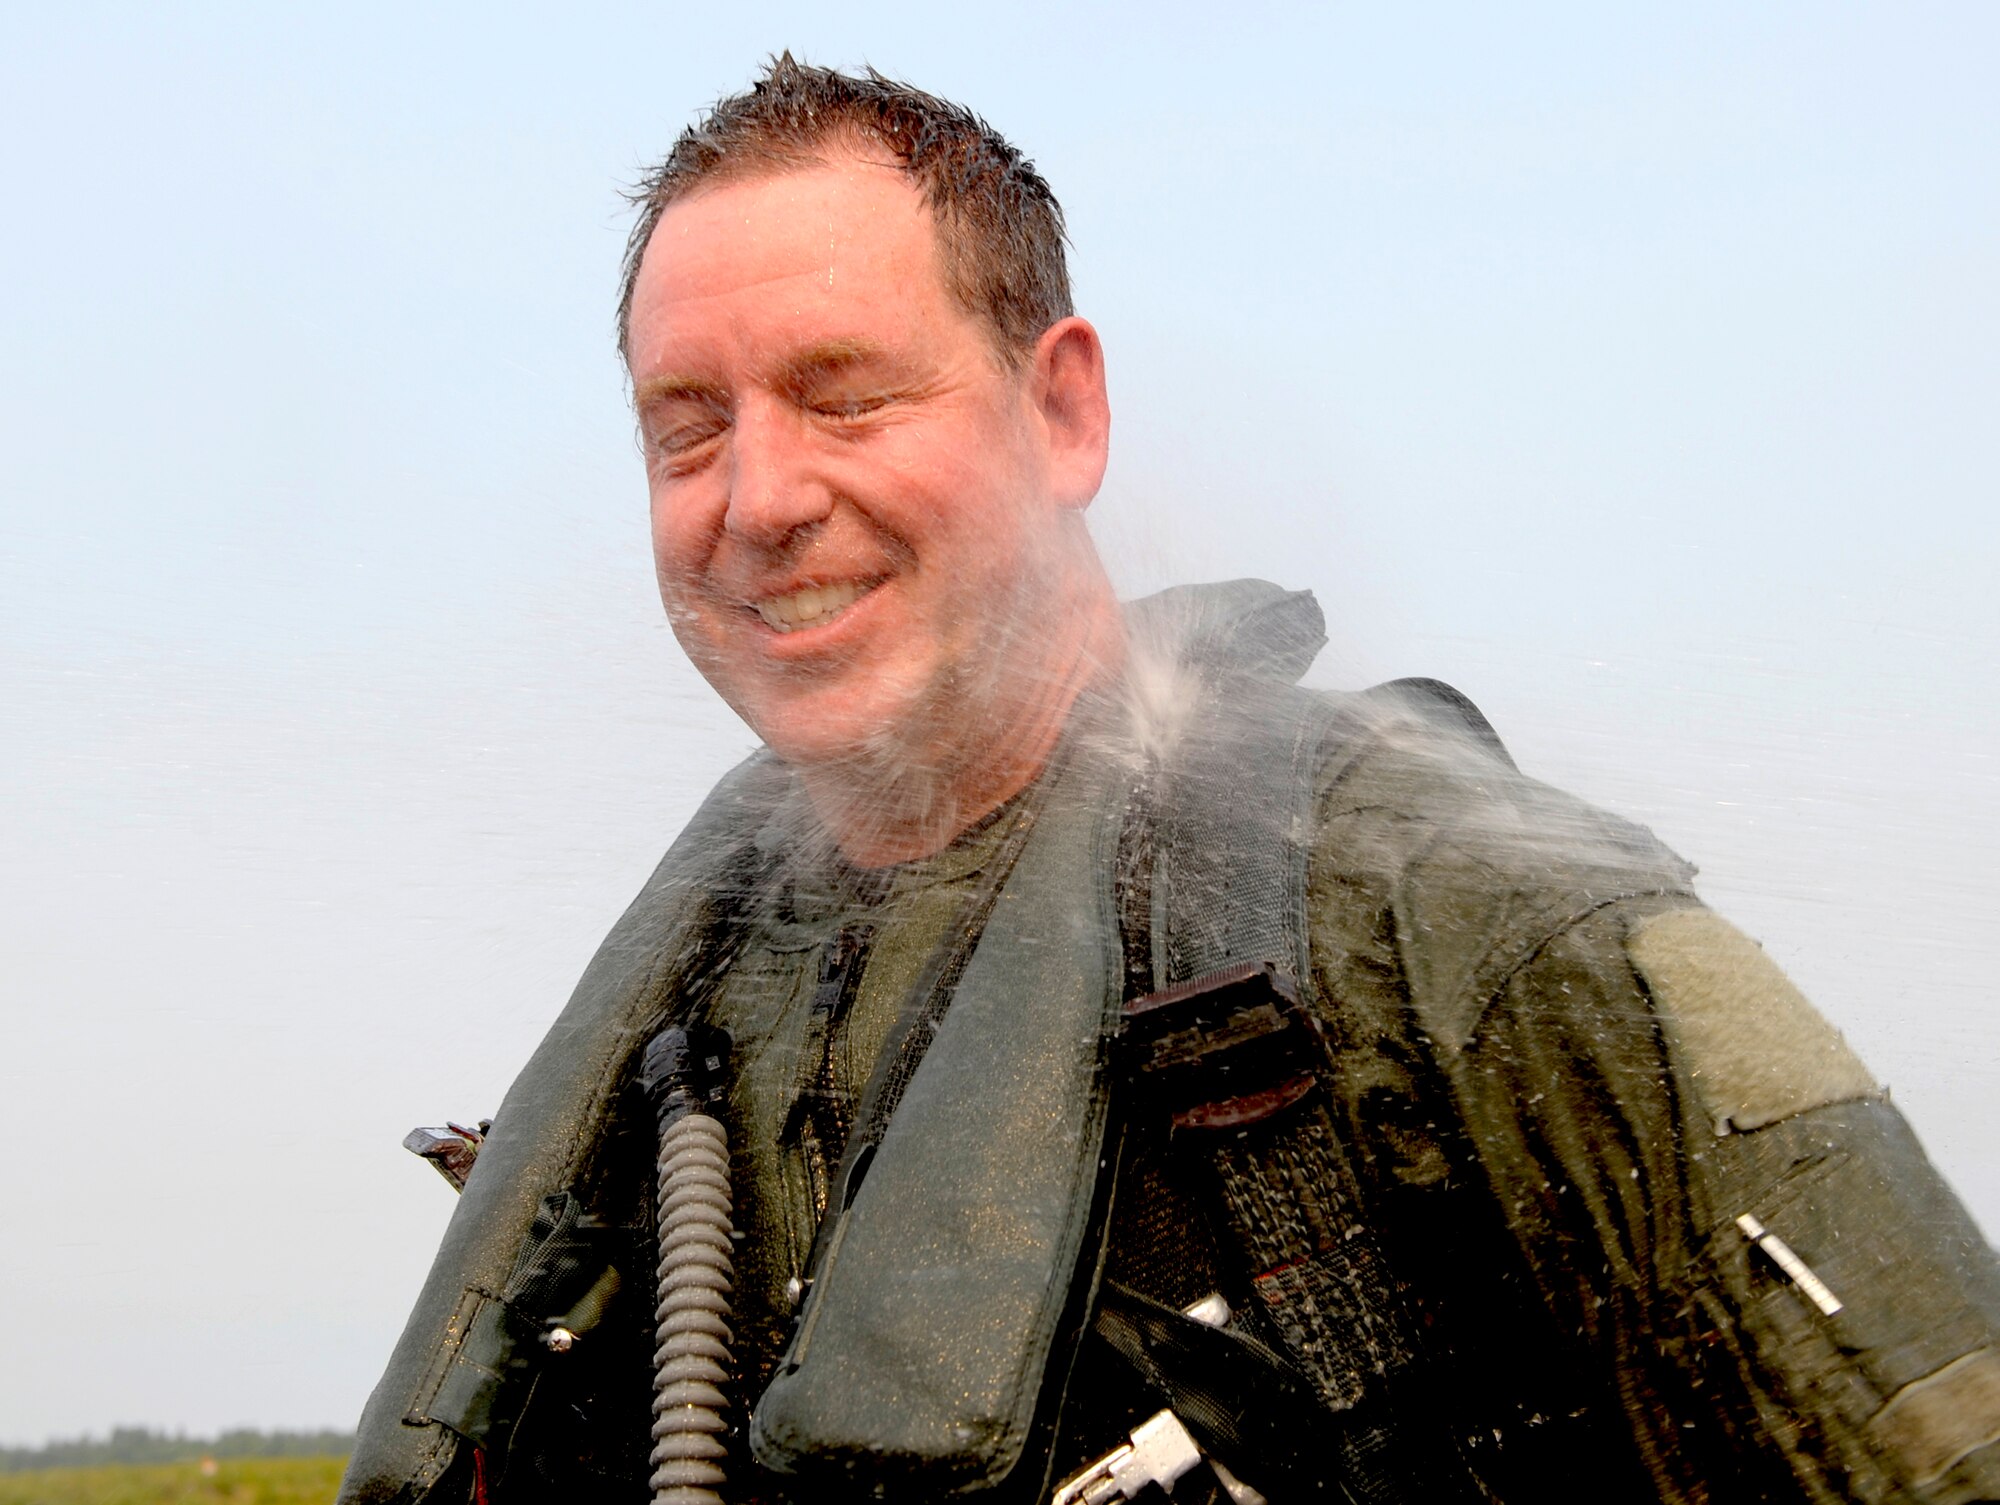 ELMENDORF AIR FORCE BASE, Alaska -- Col. James Hecker is doused with water after his final flight here July 9. Hecker was the 3rd Operations Group commander. (U.S. Air Force photo/Master Sgt. Keith Brown)